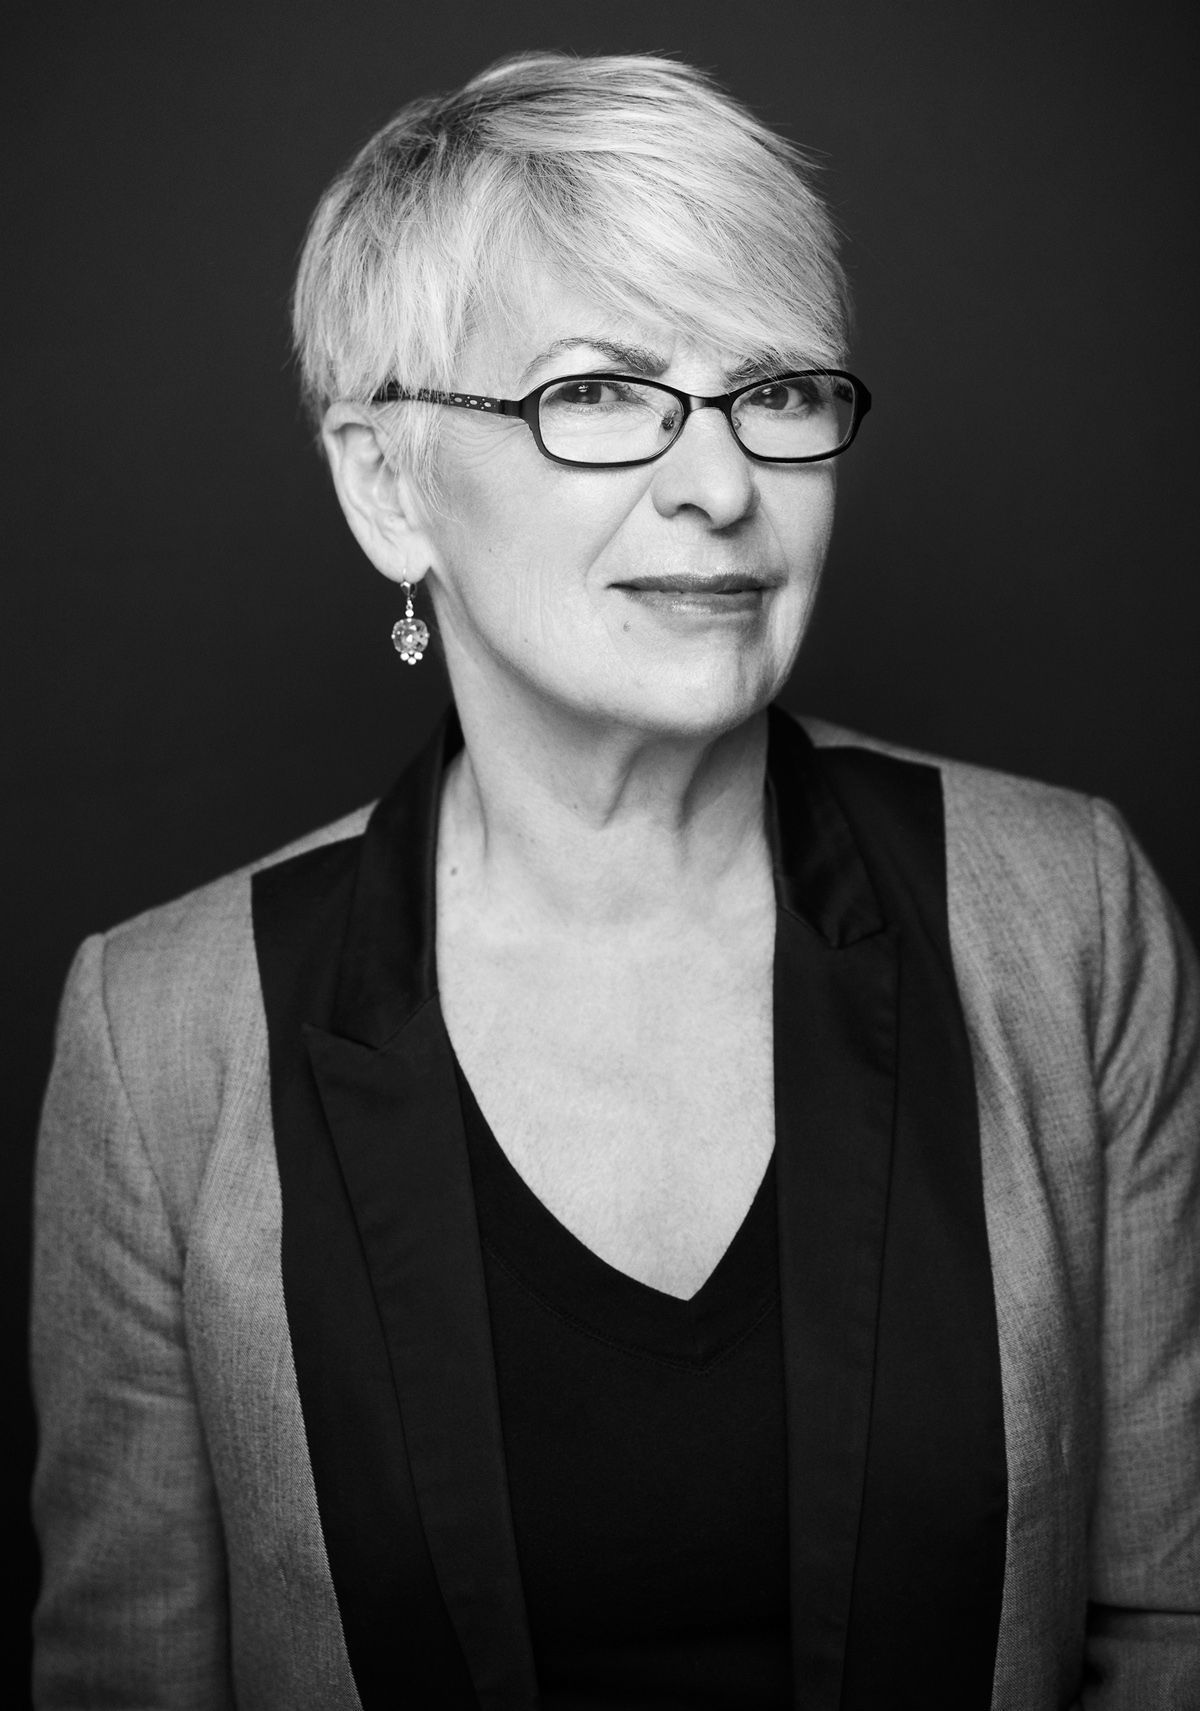 Black and white studio photograph of an older woman. She has very short gray hair, and she wears earrings, glasses, a black blouse, and a gray and black jacket. She smiles discreetly at the camera.